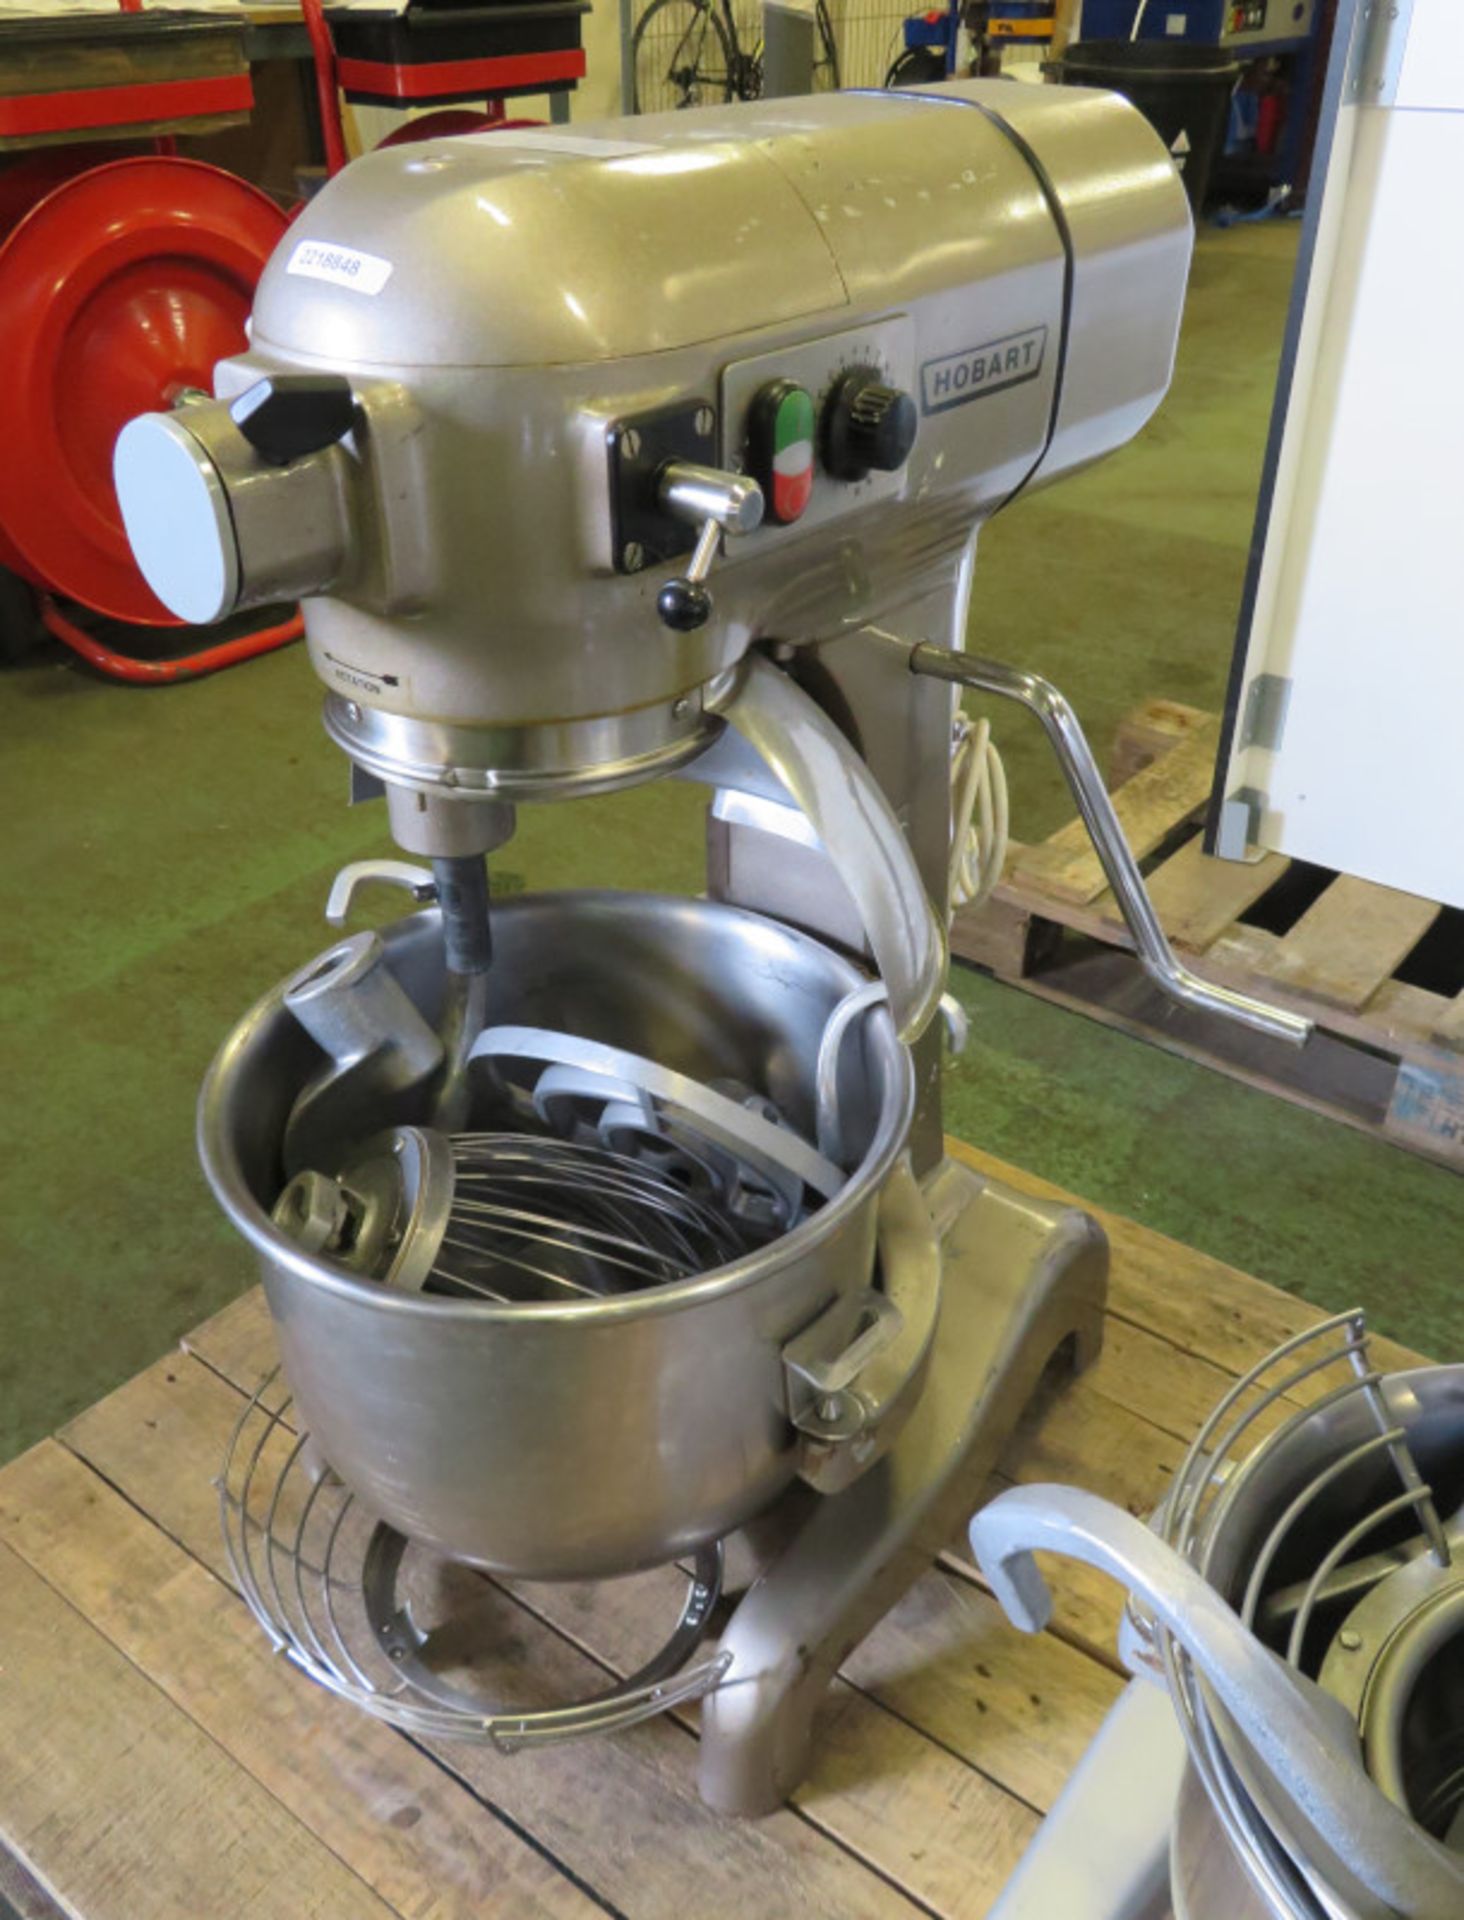 Hobbart A200N Mixer with Accessories - dough hook, whisk, paddle, guard - Image 2 of 3